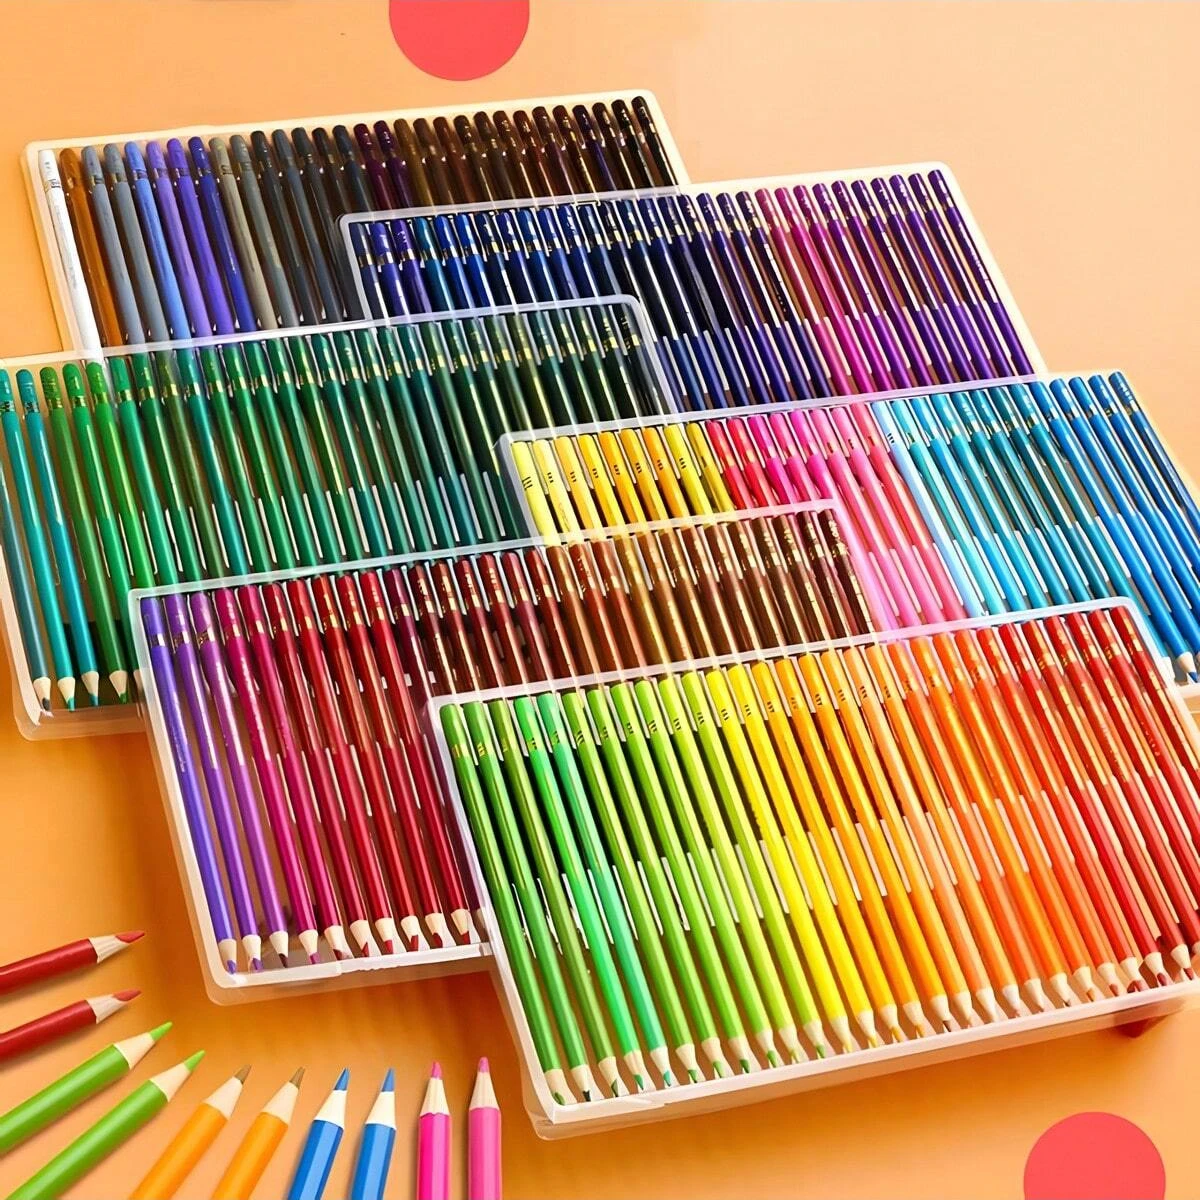 Buy Drawing Pencils Art Supplies – 55pc Colored Pencils For Kids, Teens,  And Adults Includes Charcoal Pencils, Graphite Pencils, Sketch Pencils  Digital Ebook Library Of Drawing Tutorials And Sketch book Online at